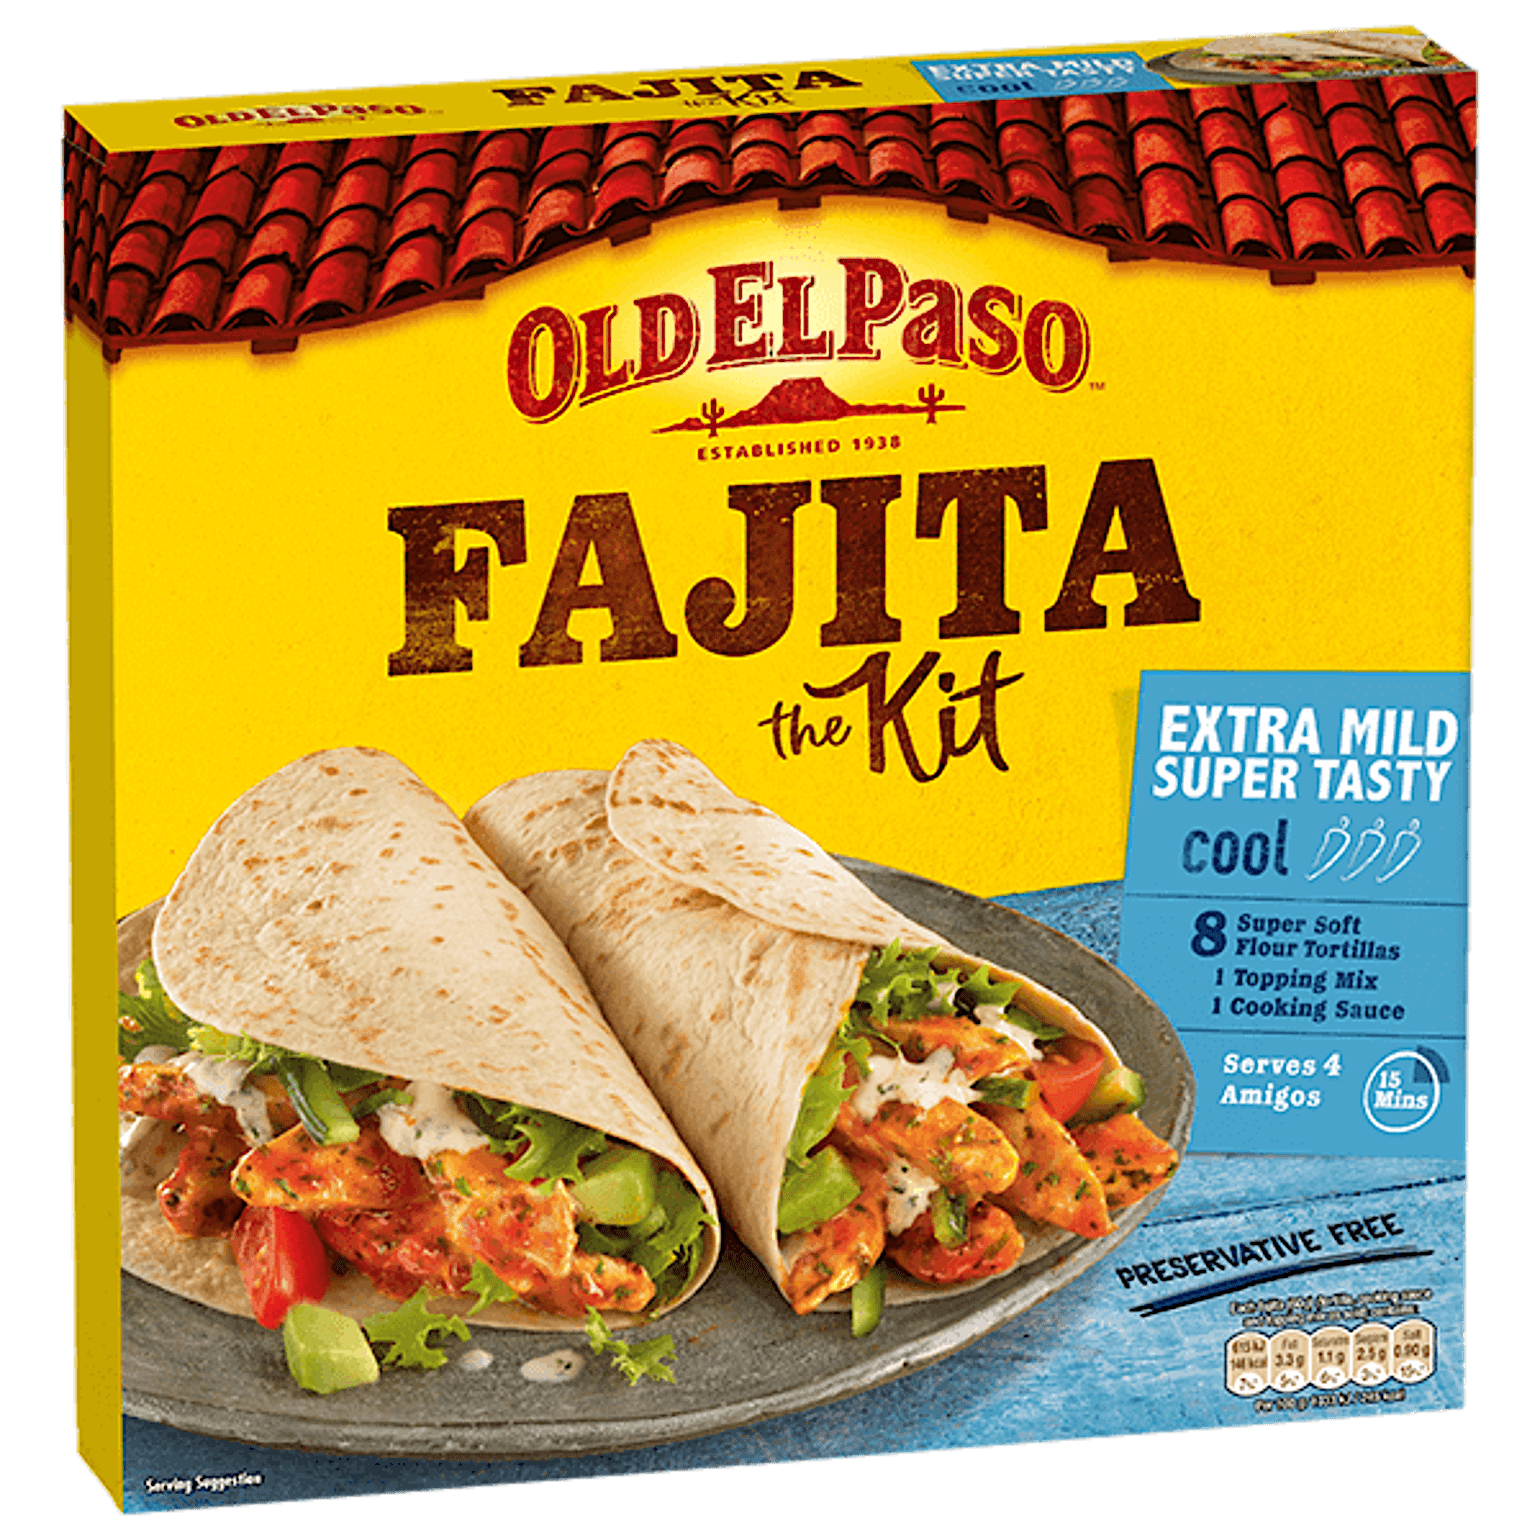 pack of Old El Paso's extra mild super tasty fajita kit containing tortillas, spice mix and cooking sauce (476g)